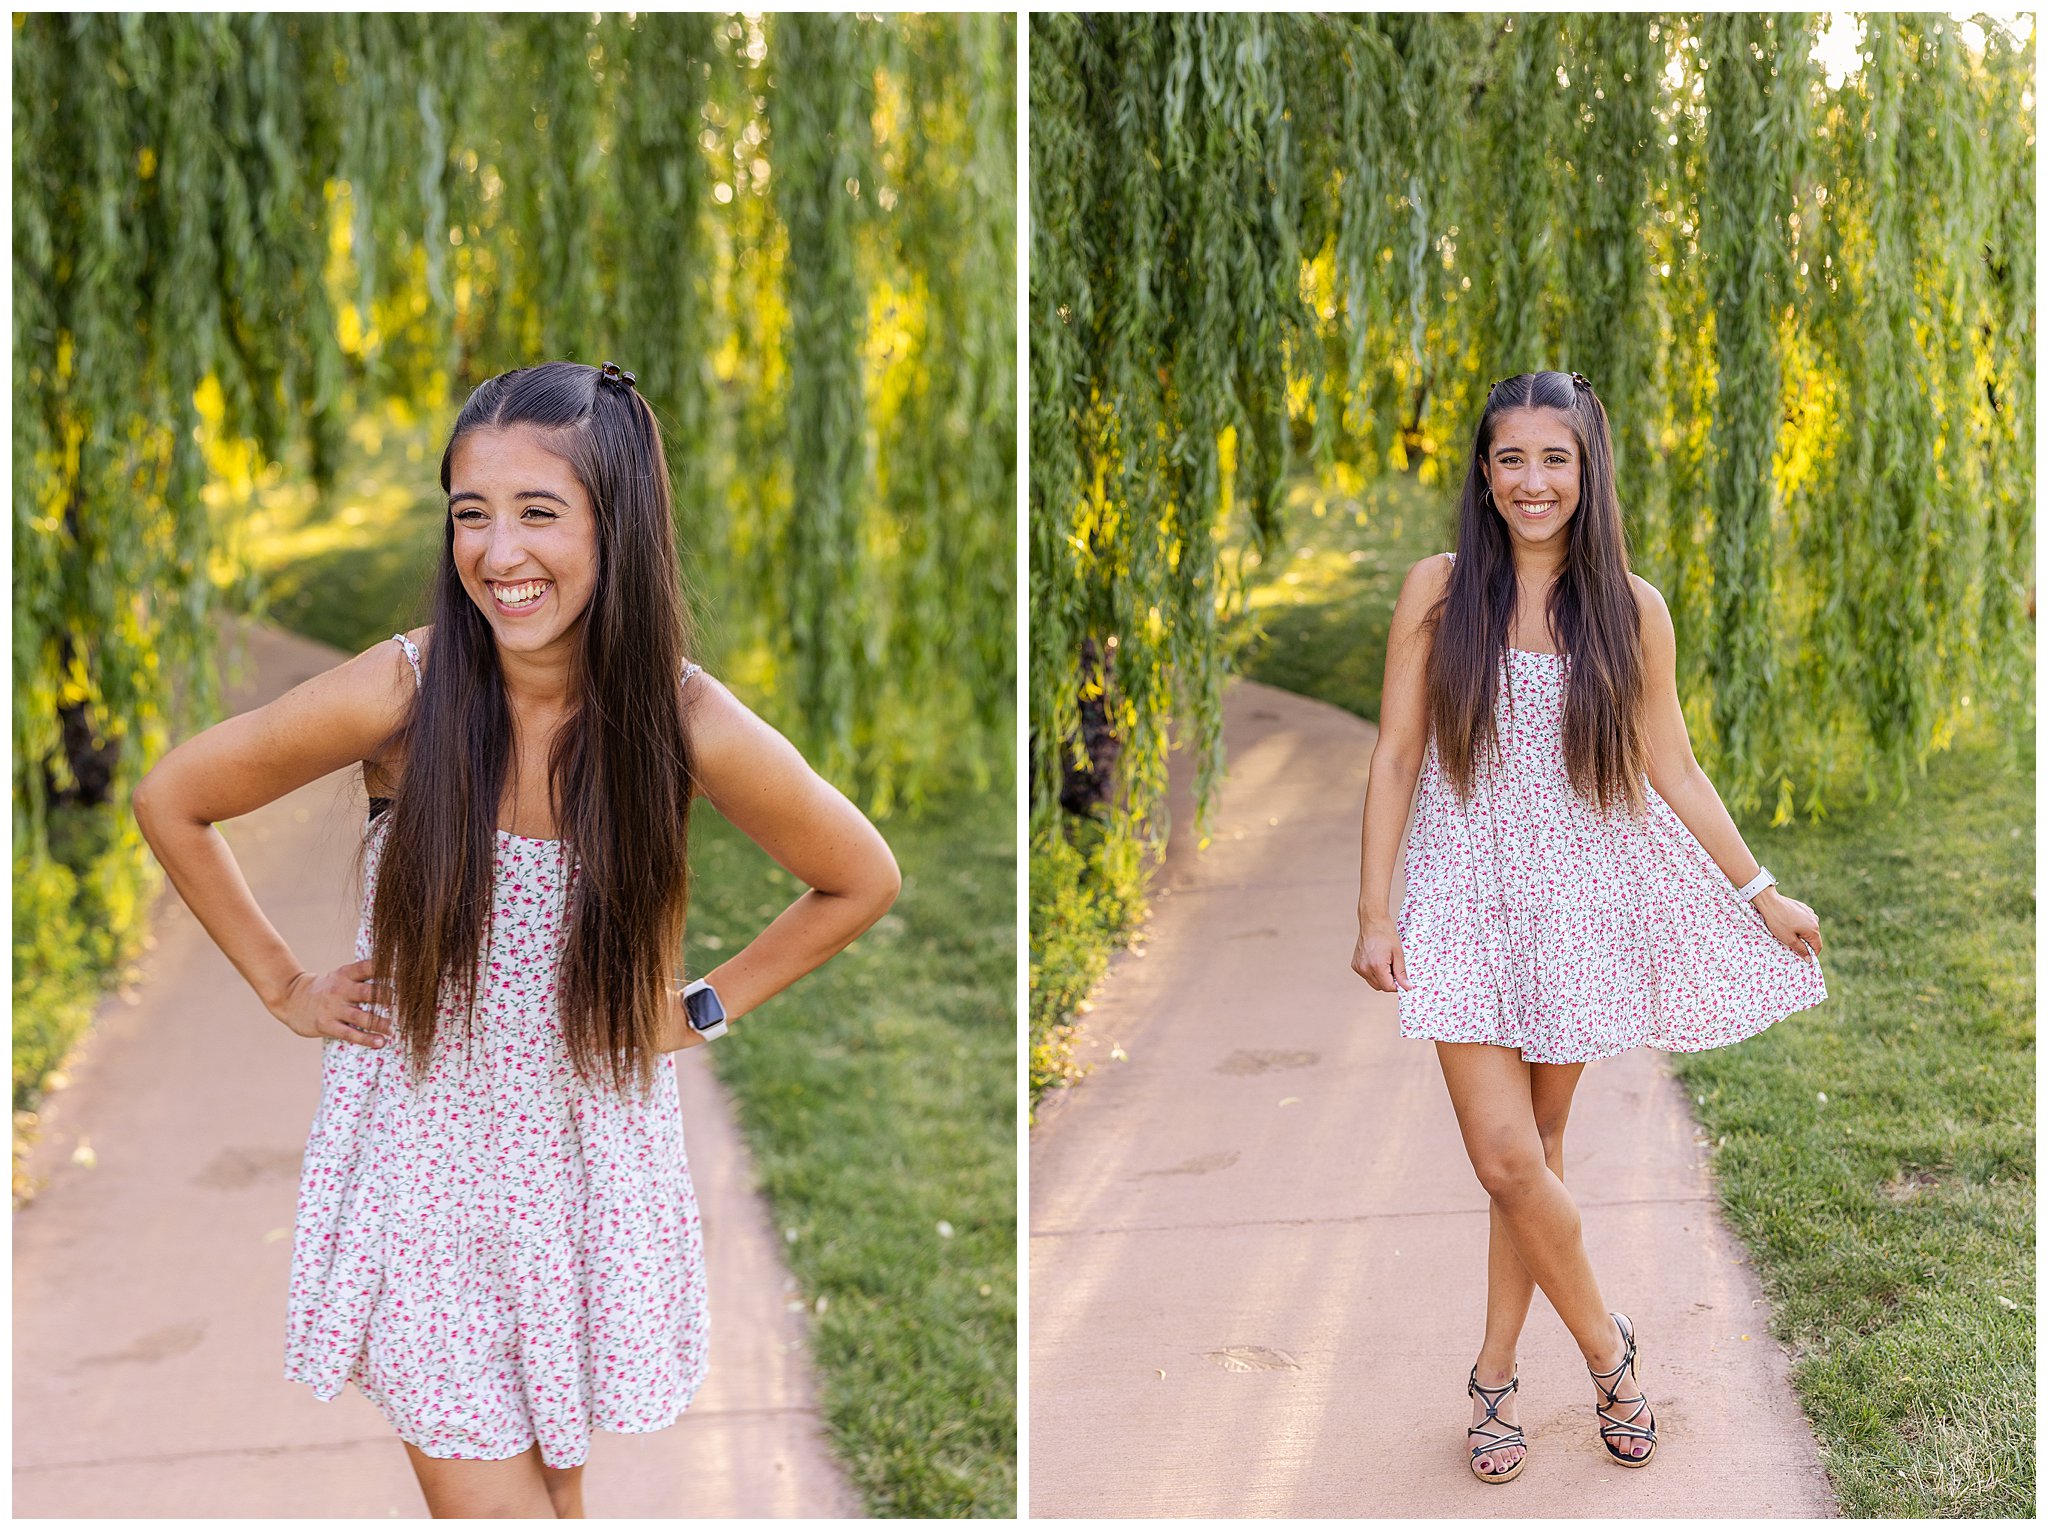 White Ranch Events High School Senior Session Chico California Willow Tree UCLA,